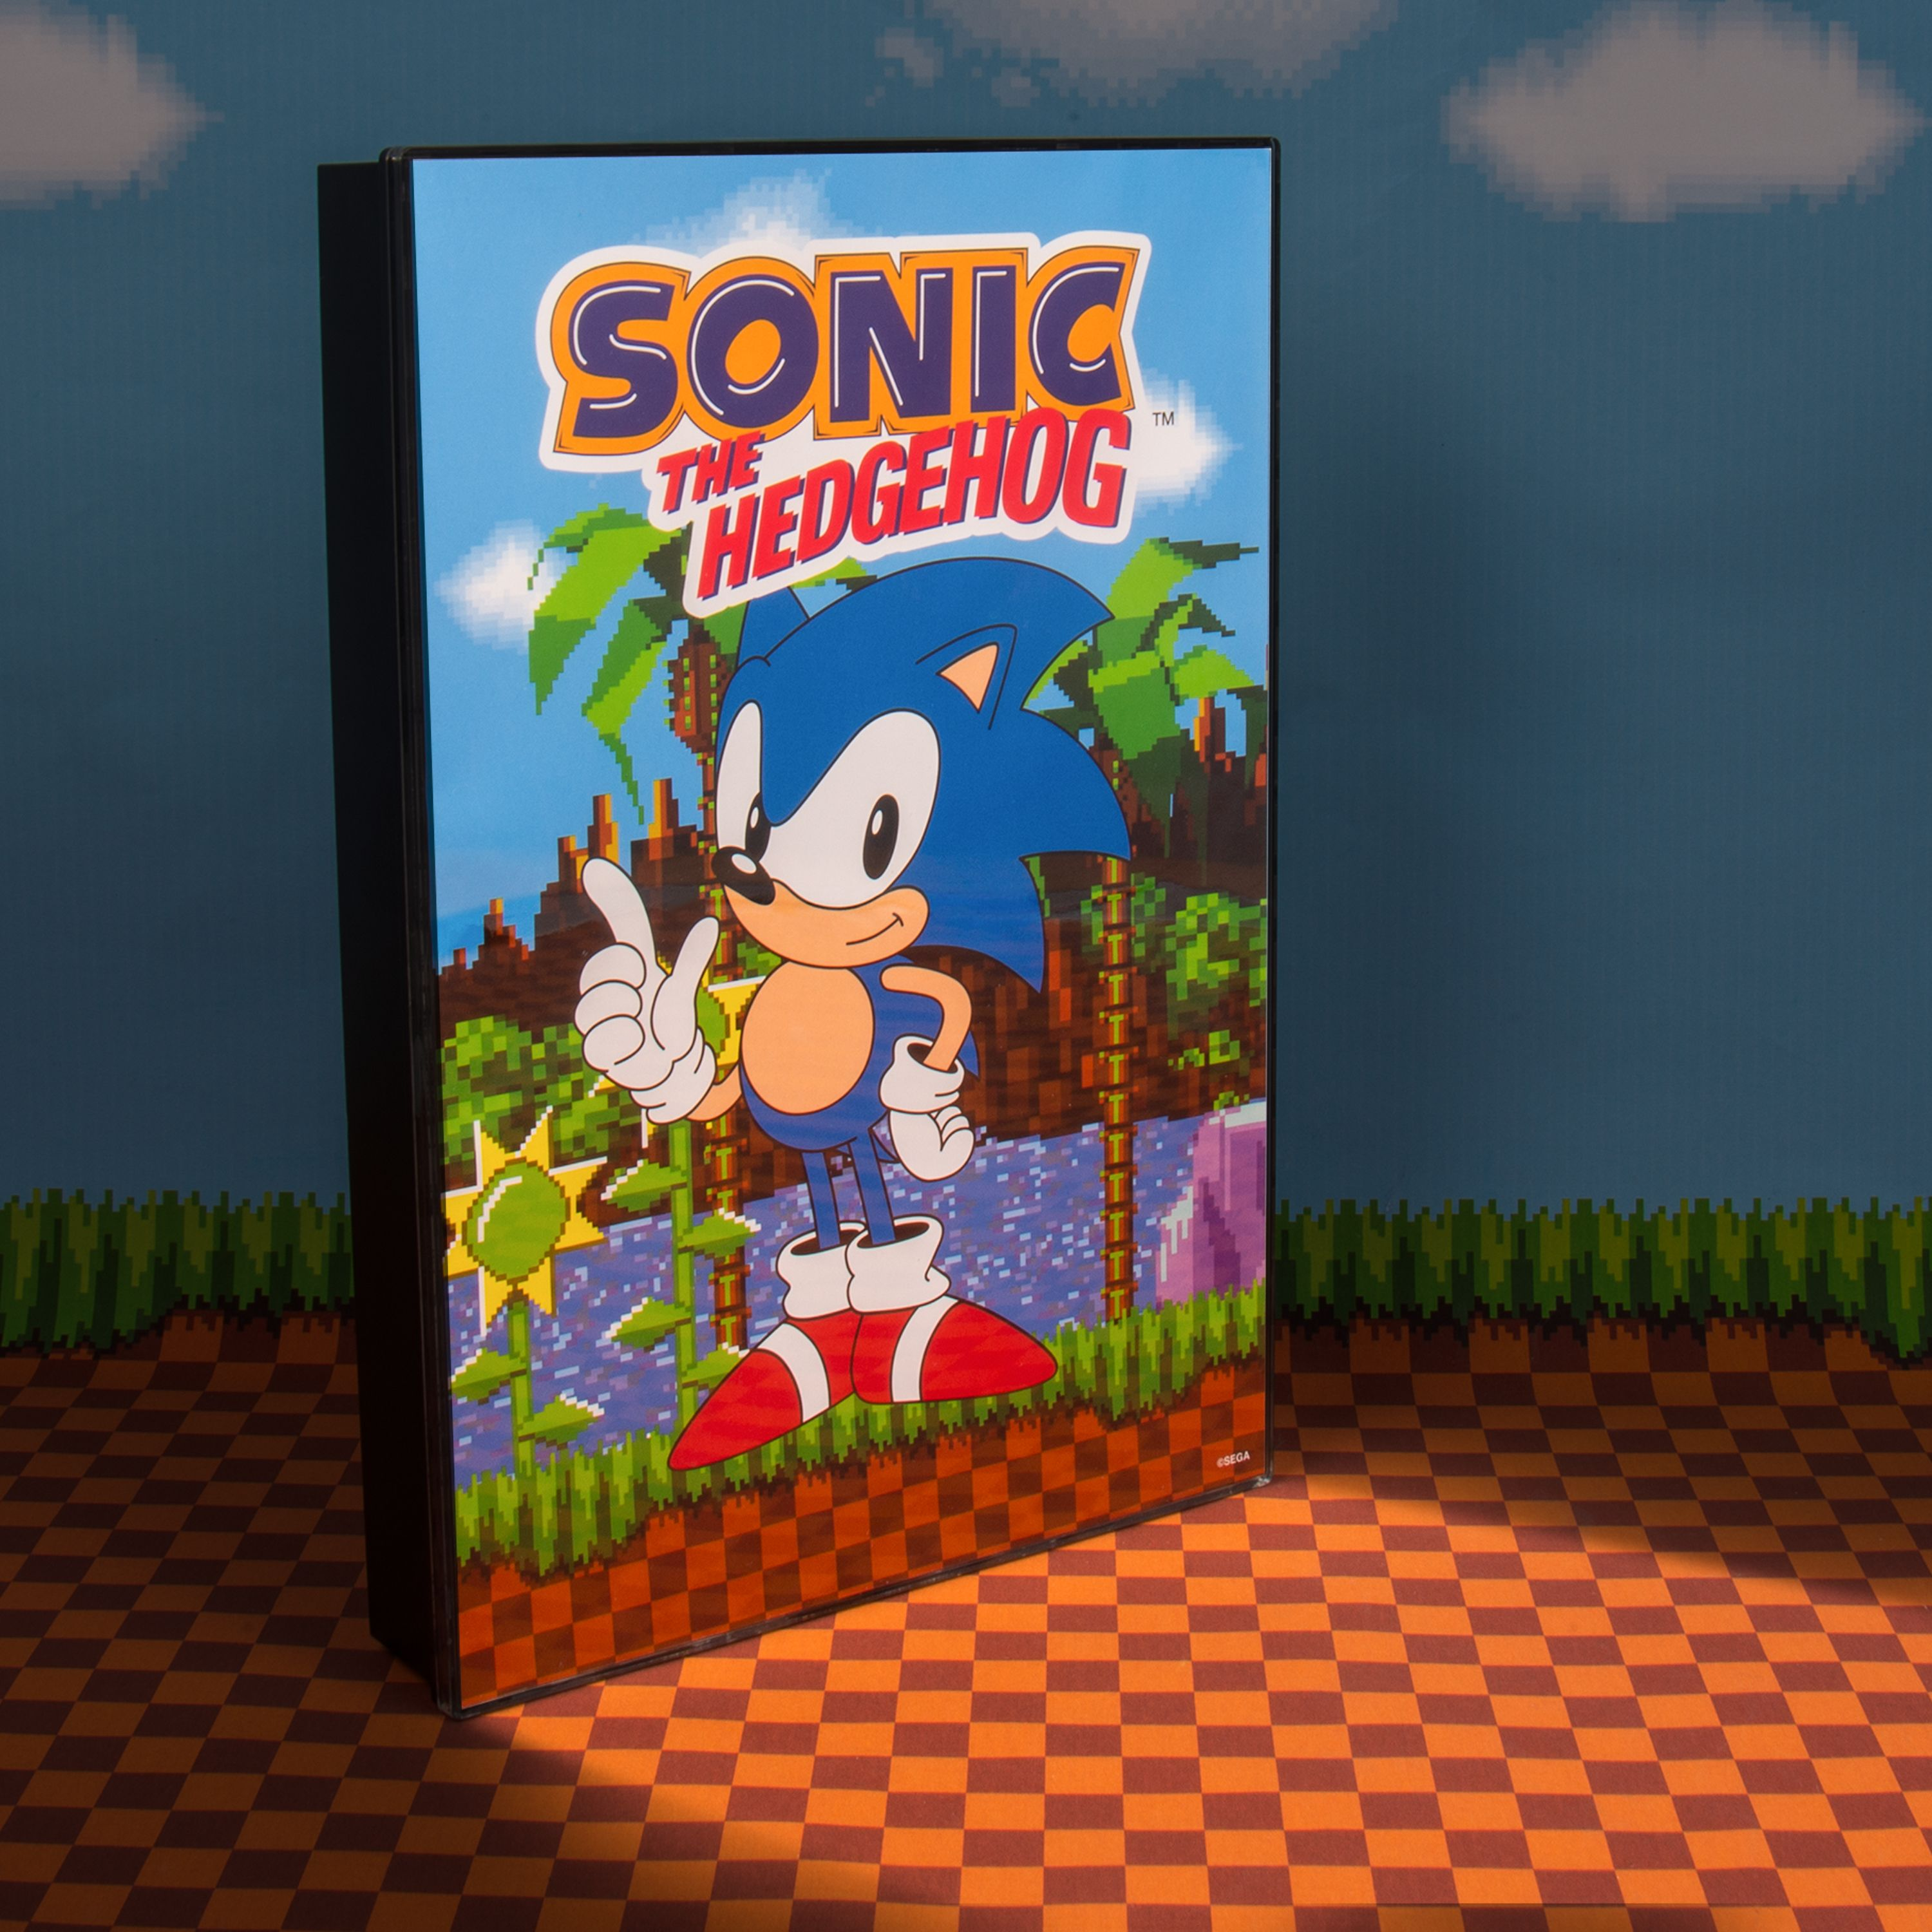 The Licht Hedgehog Sonic Poster